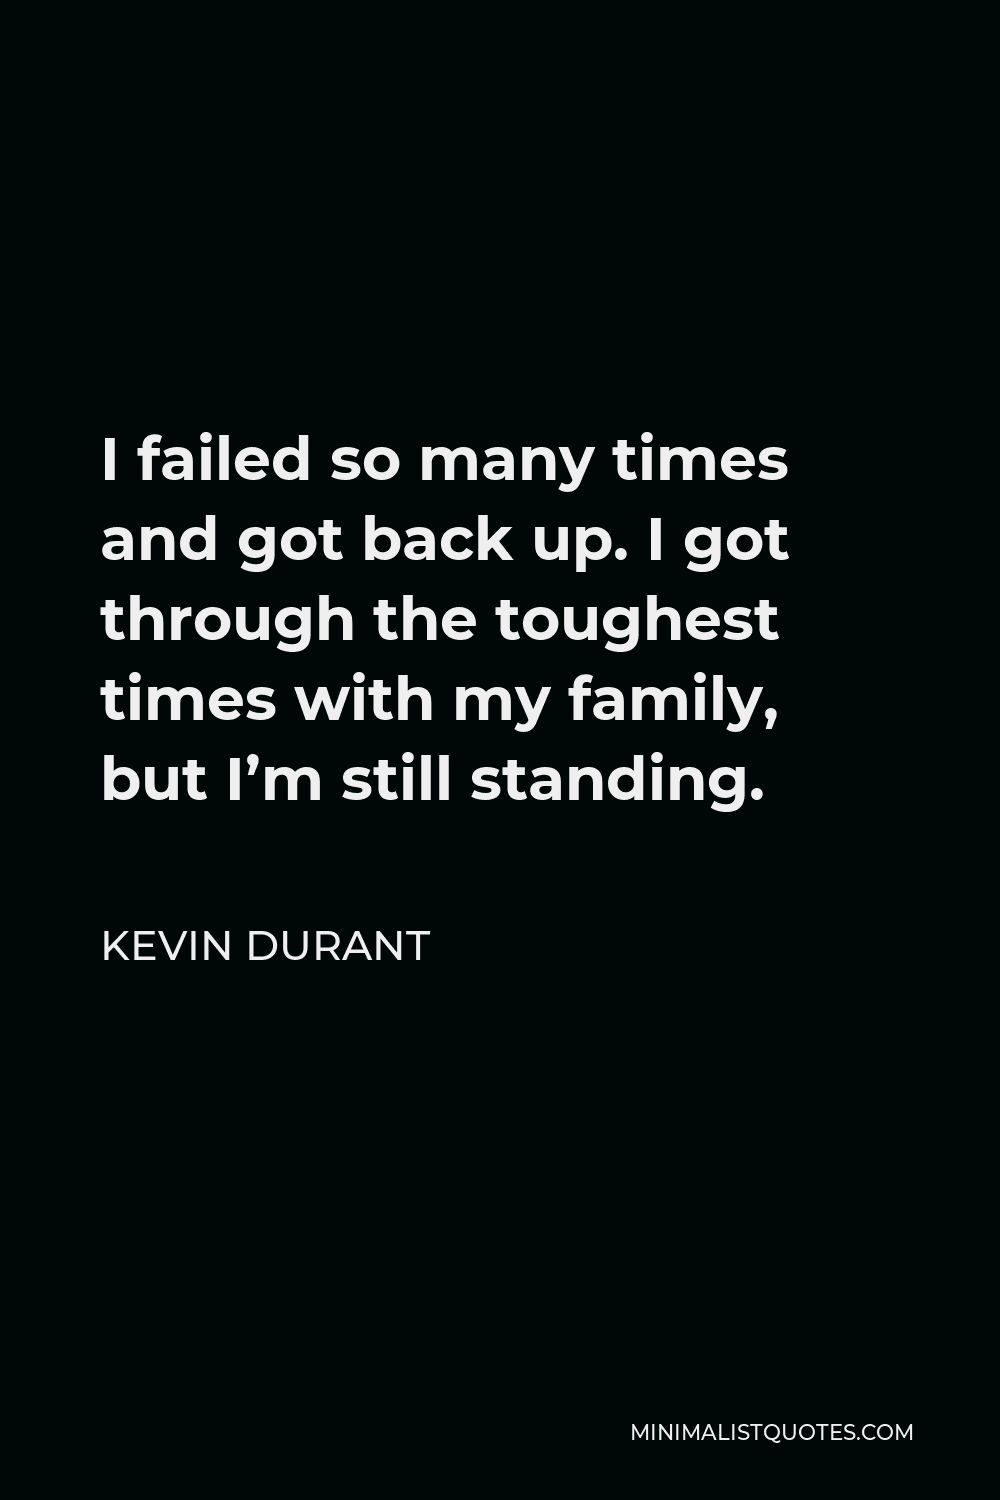 Kevin Durant Quote - I failed so many times and got back up. I got through the toughest times with my family, but I’m still standing.